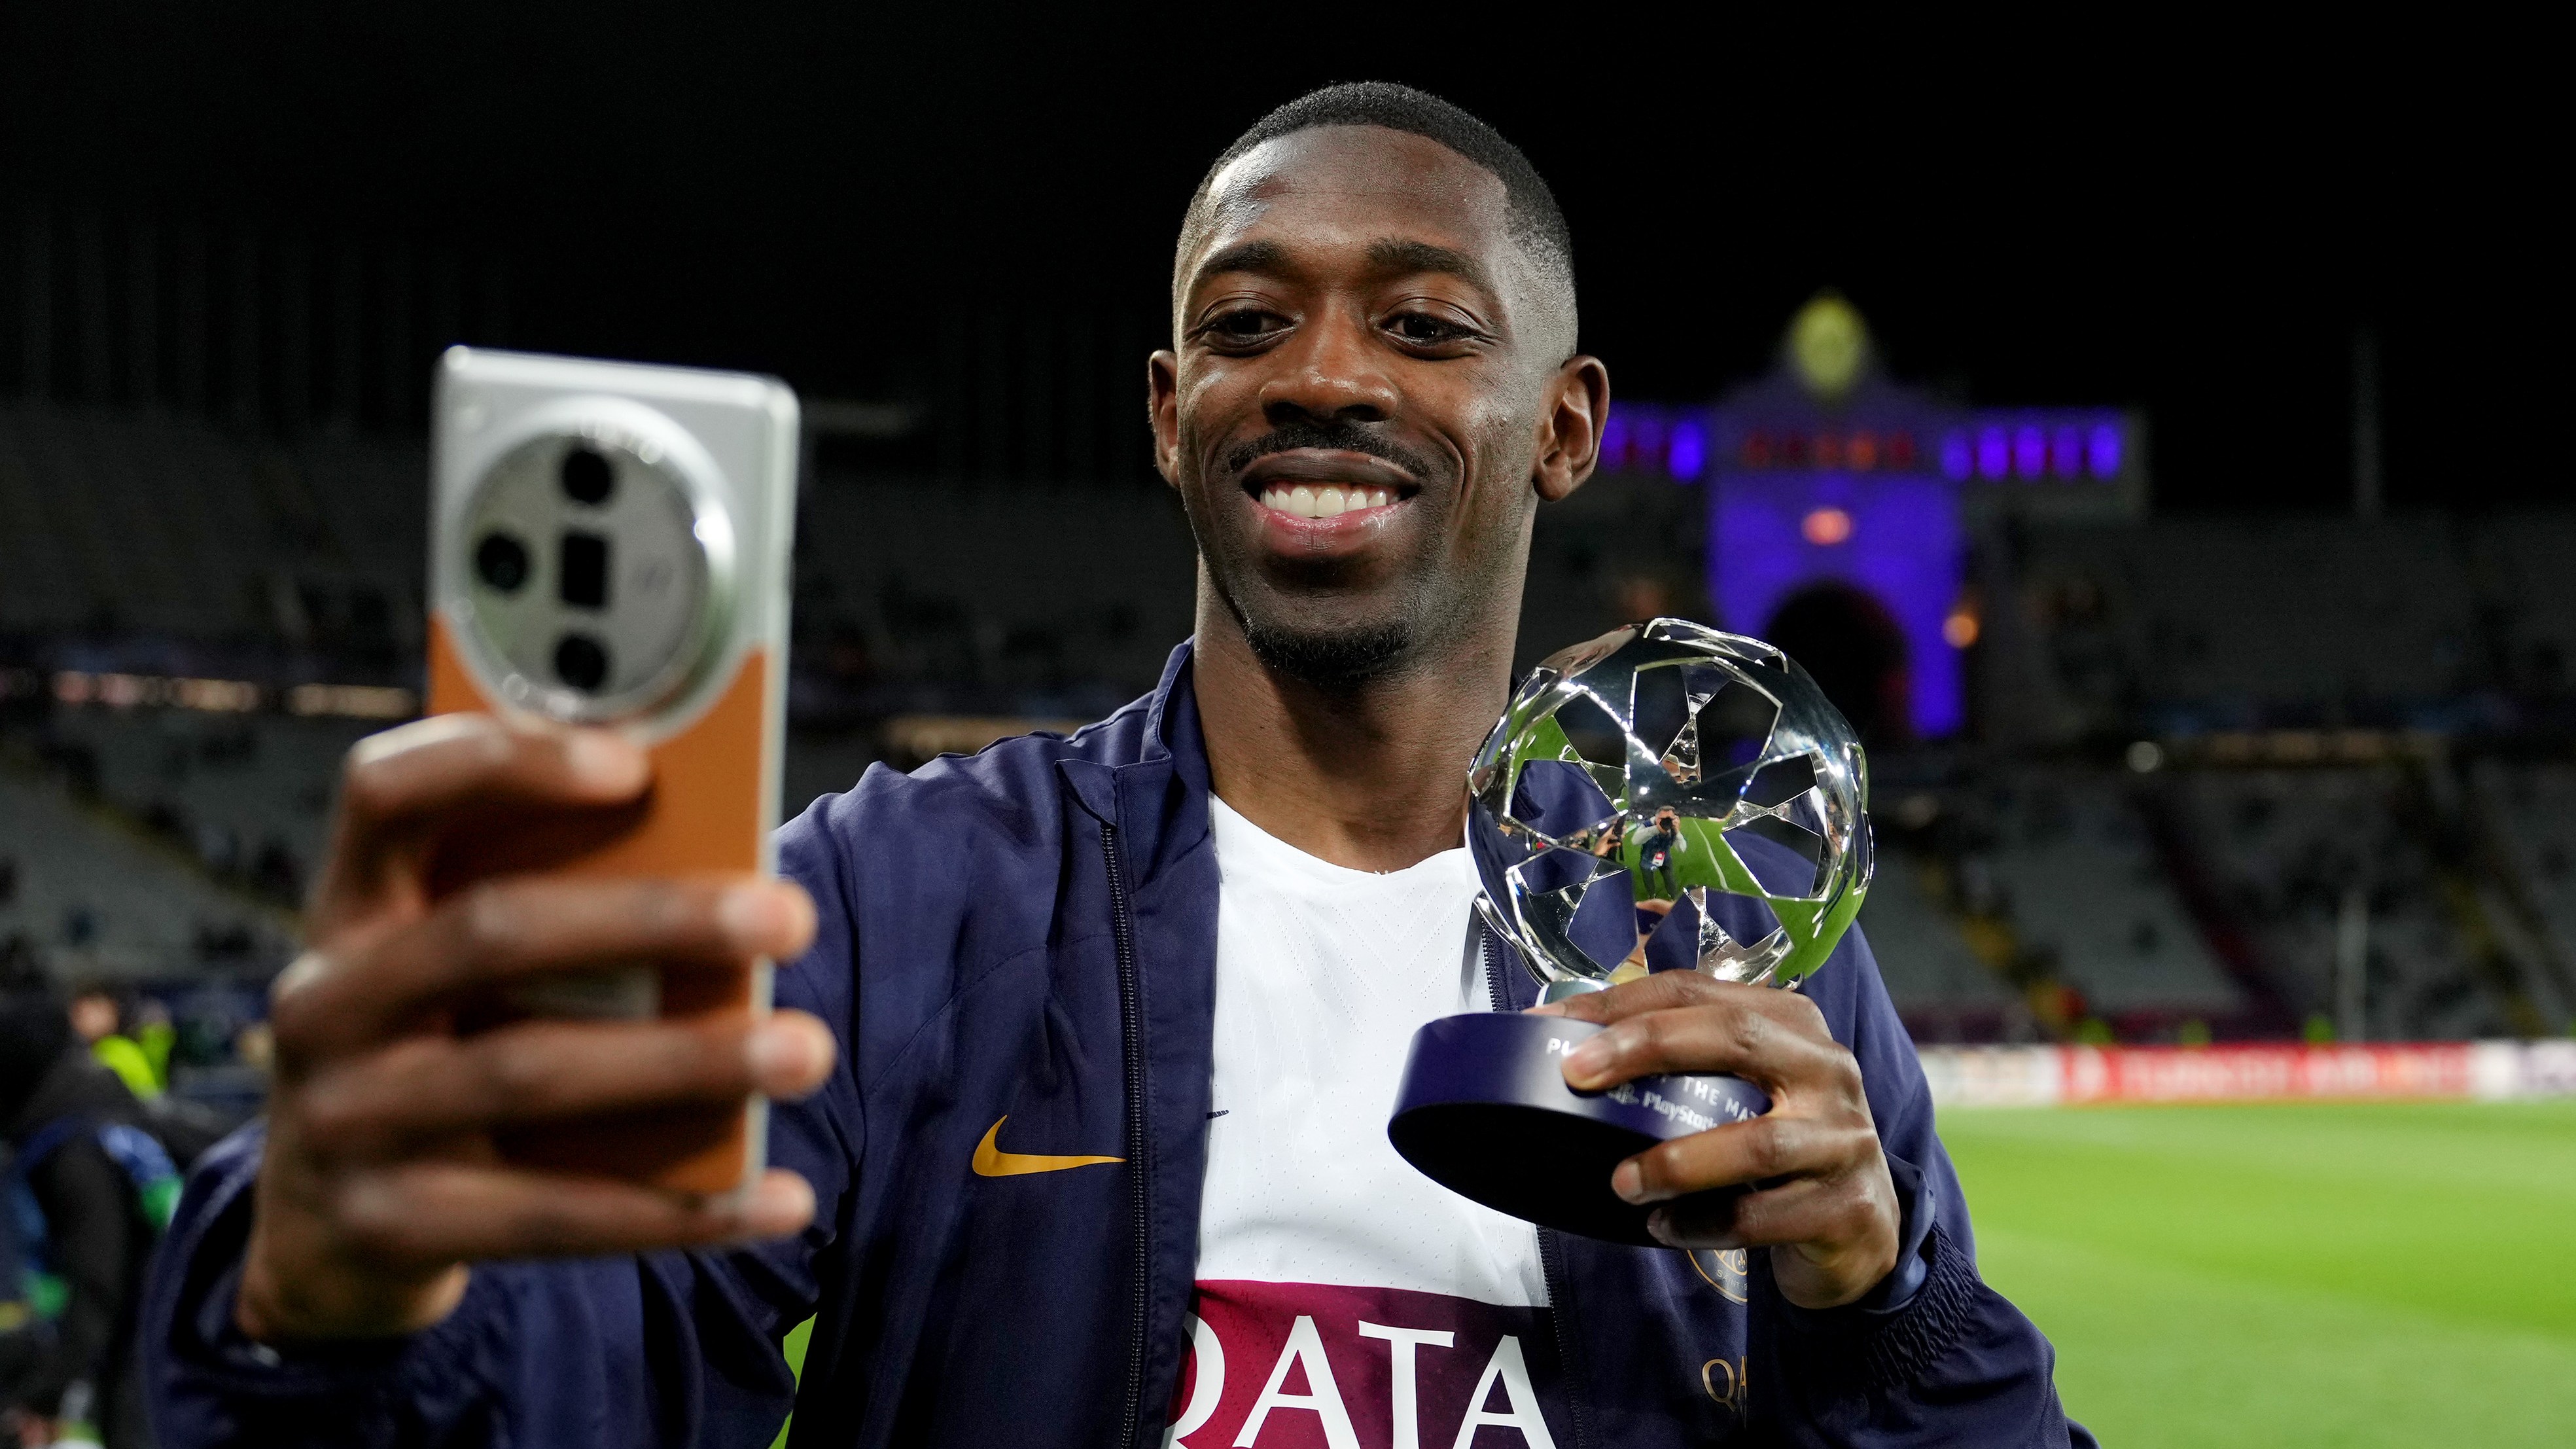 Derided as a laughing stock before the tie, Dembélé went home with a Champions League semi-final place and a man-of-the-match award